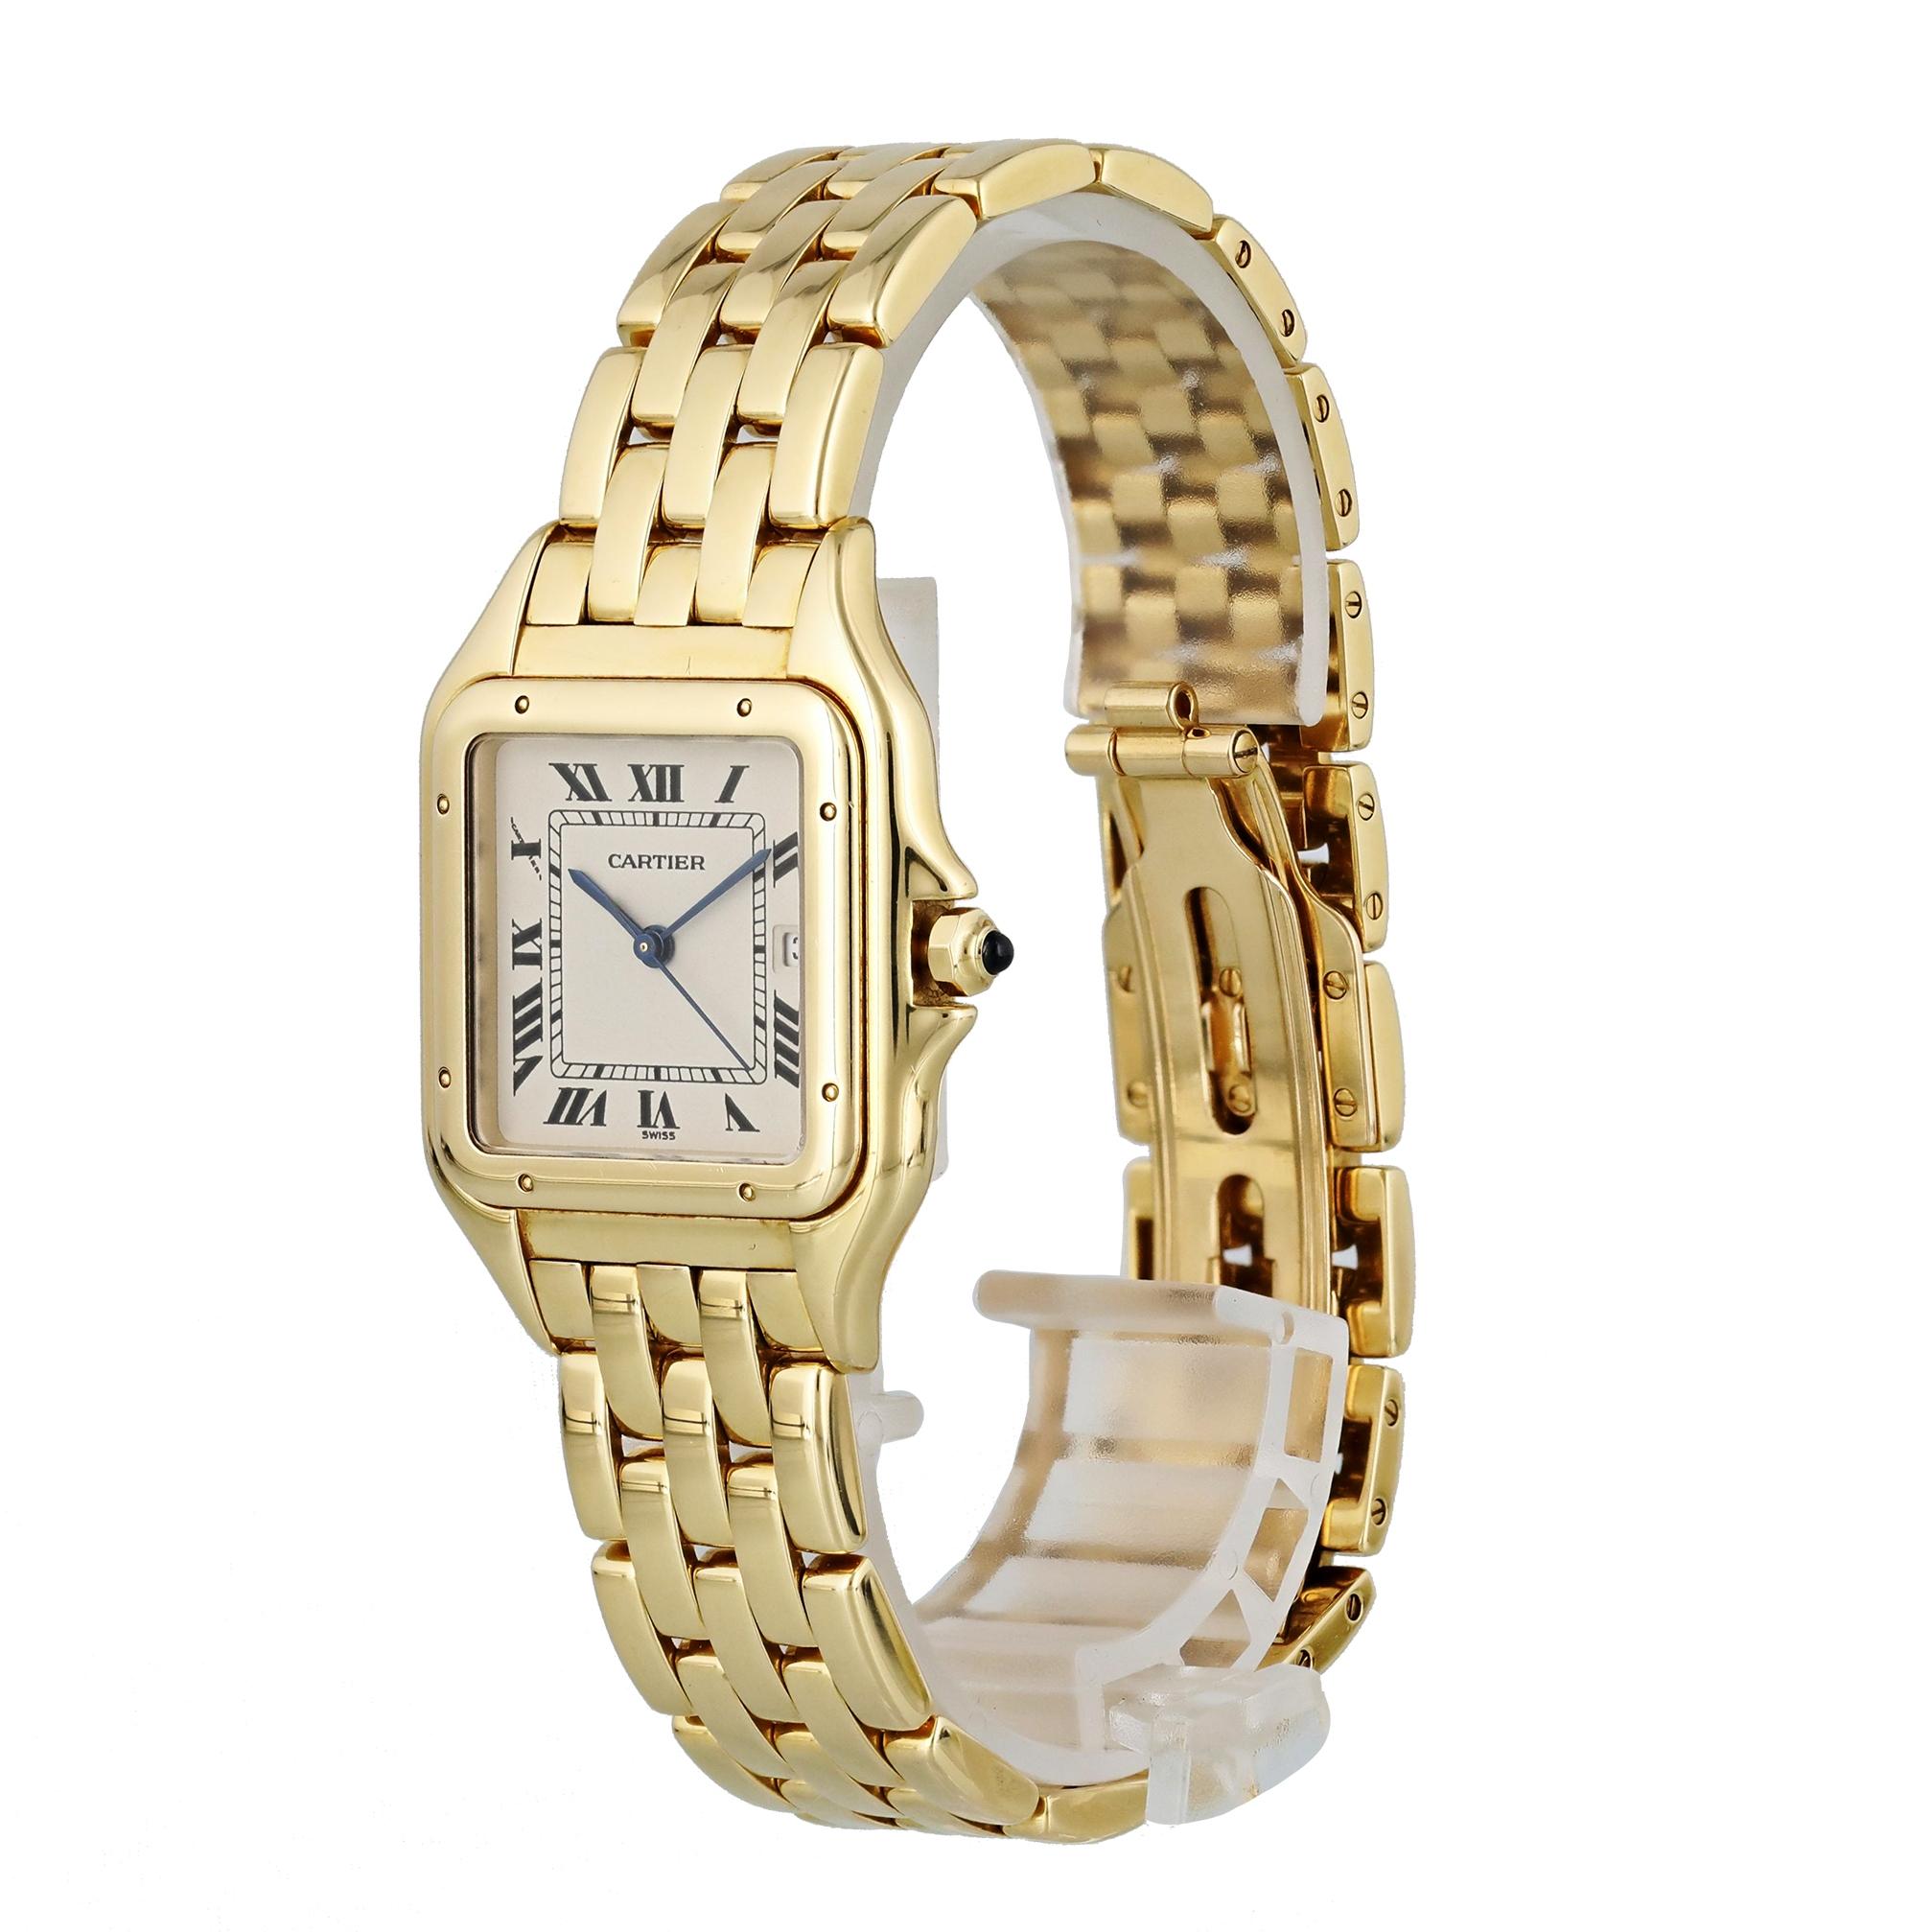 Cartier Panthere Large 887968 Watch. 
29mm 18k Yellow Gold case. 
Stainless Steel Stationary bezel. 
Off-White dial with Blue steel hands and Roman numeral hour markers. 
Minute markers on the outer dial. 
Date display at the 3 o'clock position.